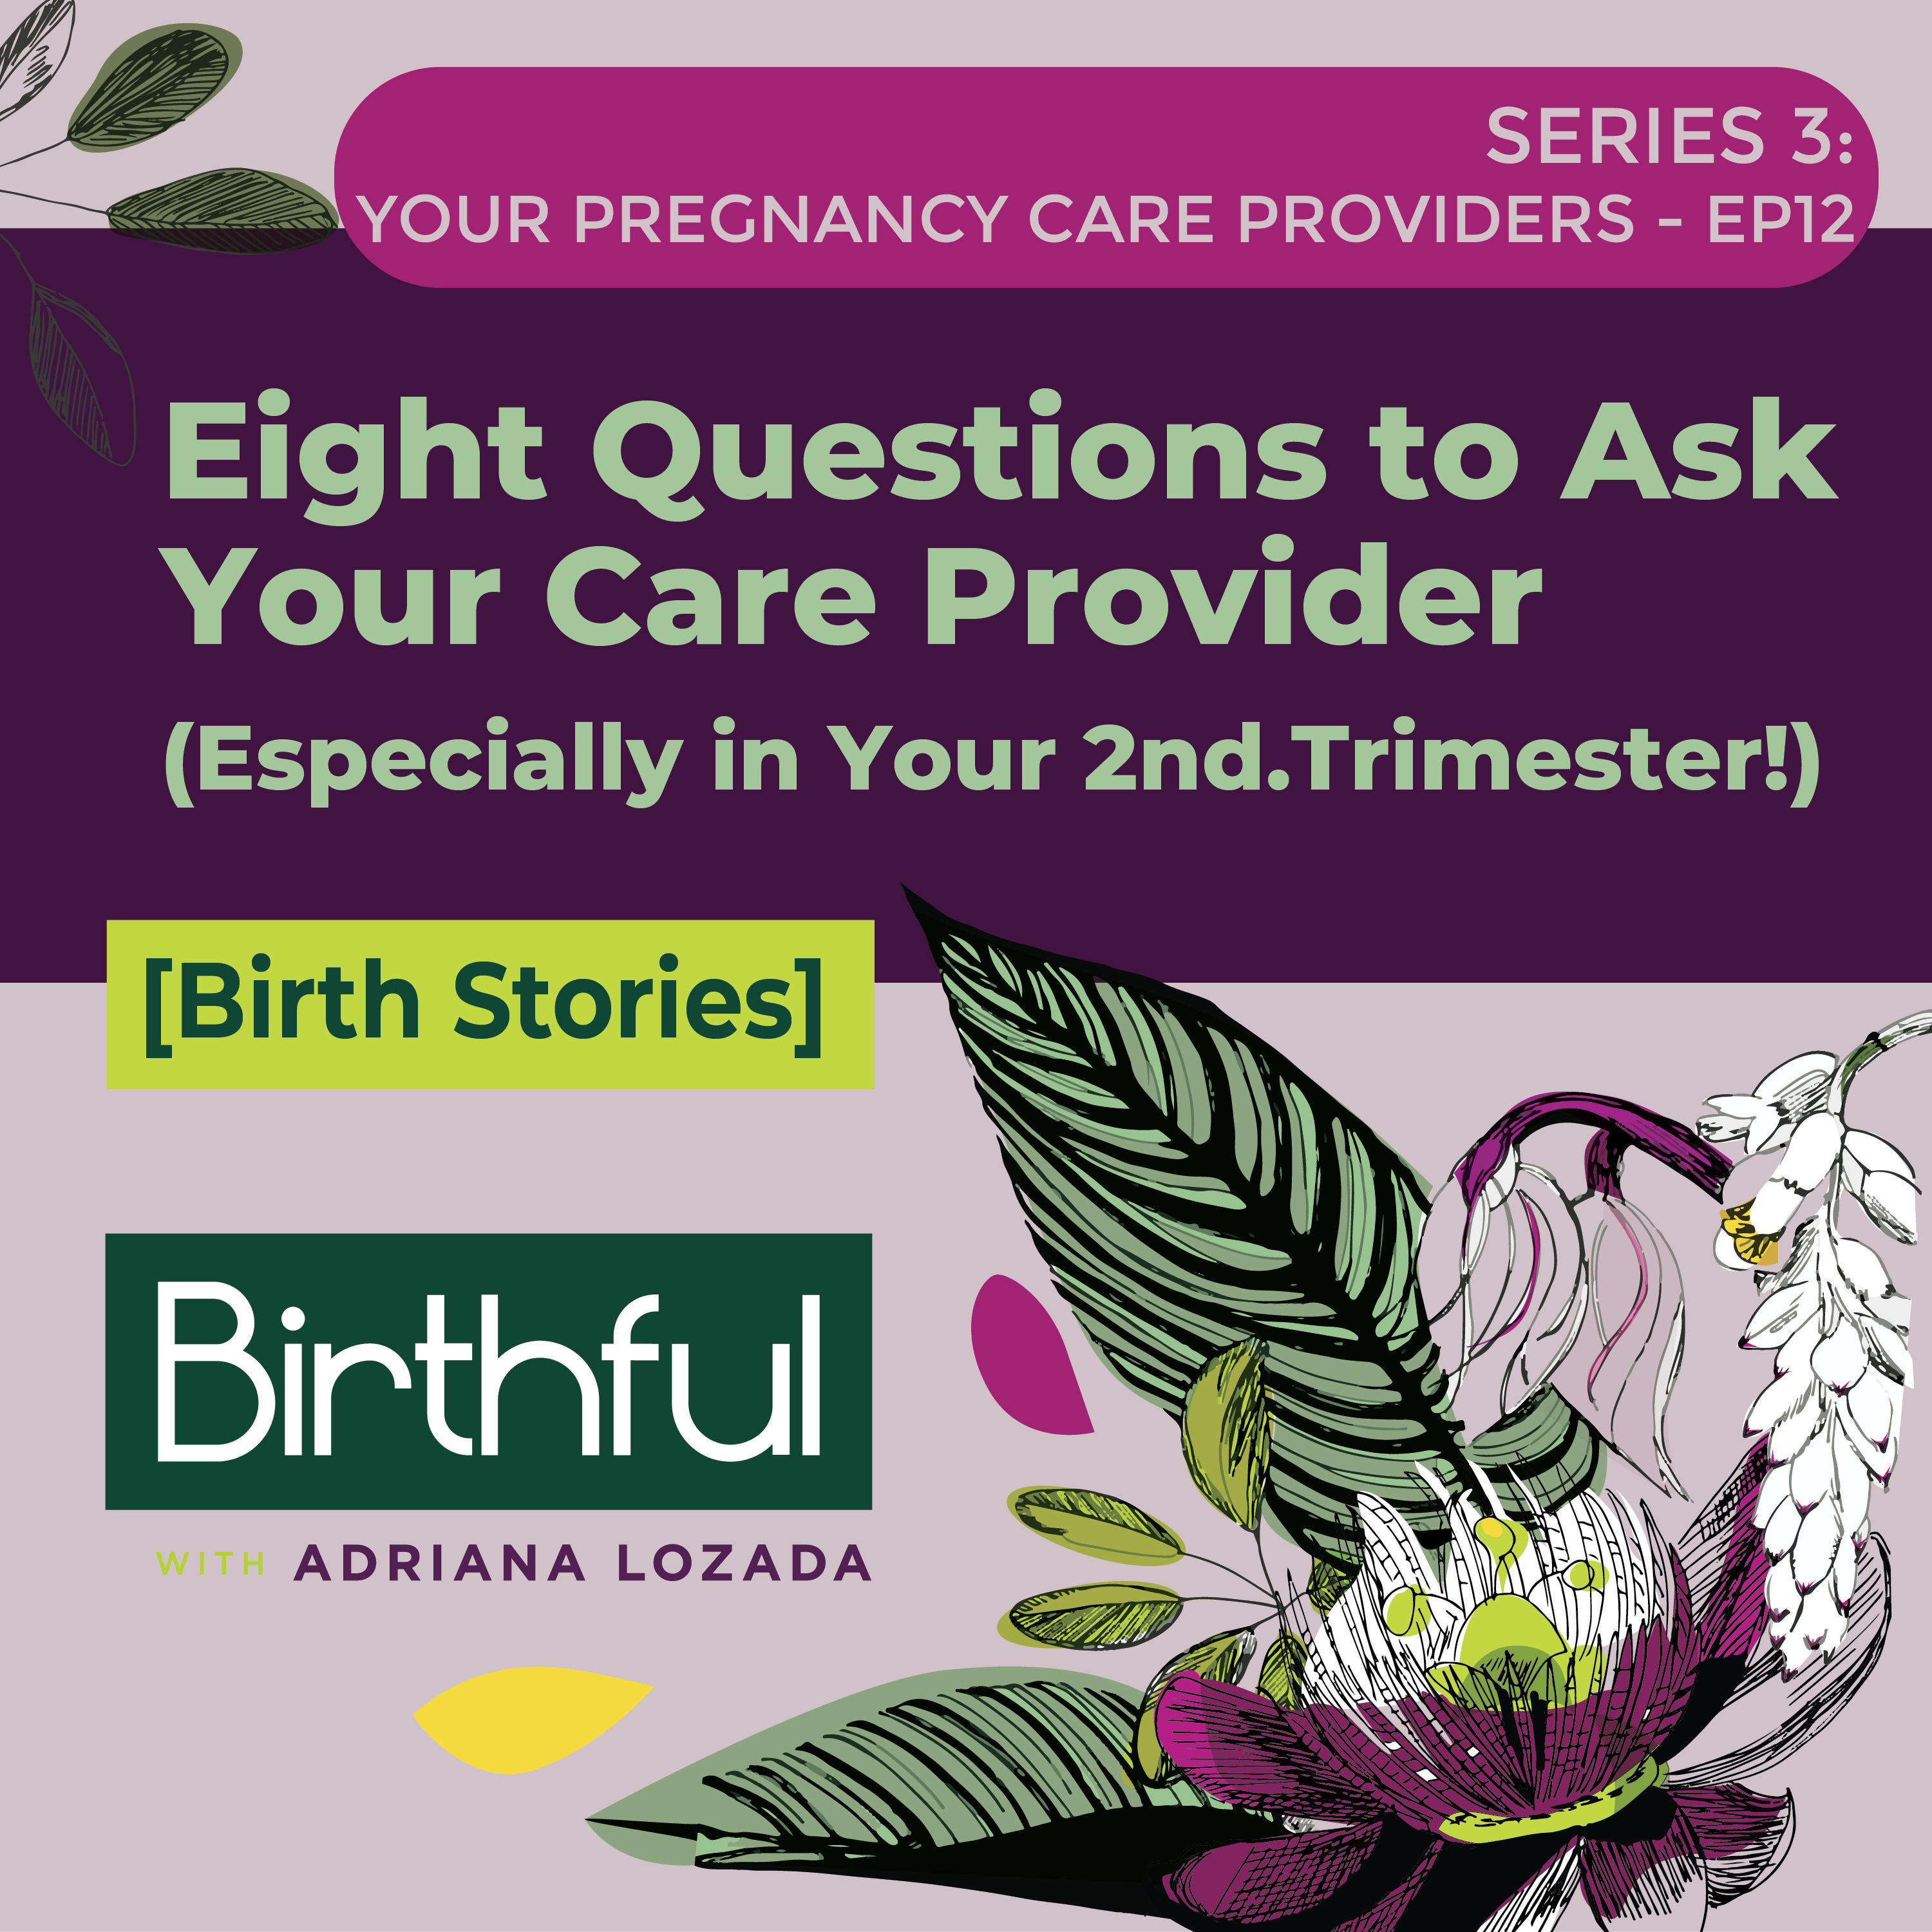 Eight Questions to Ask Your Care Provider (Especially in Your Second Trimester!)